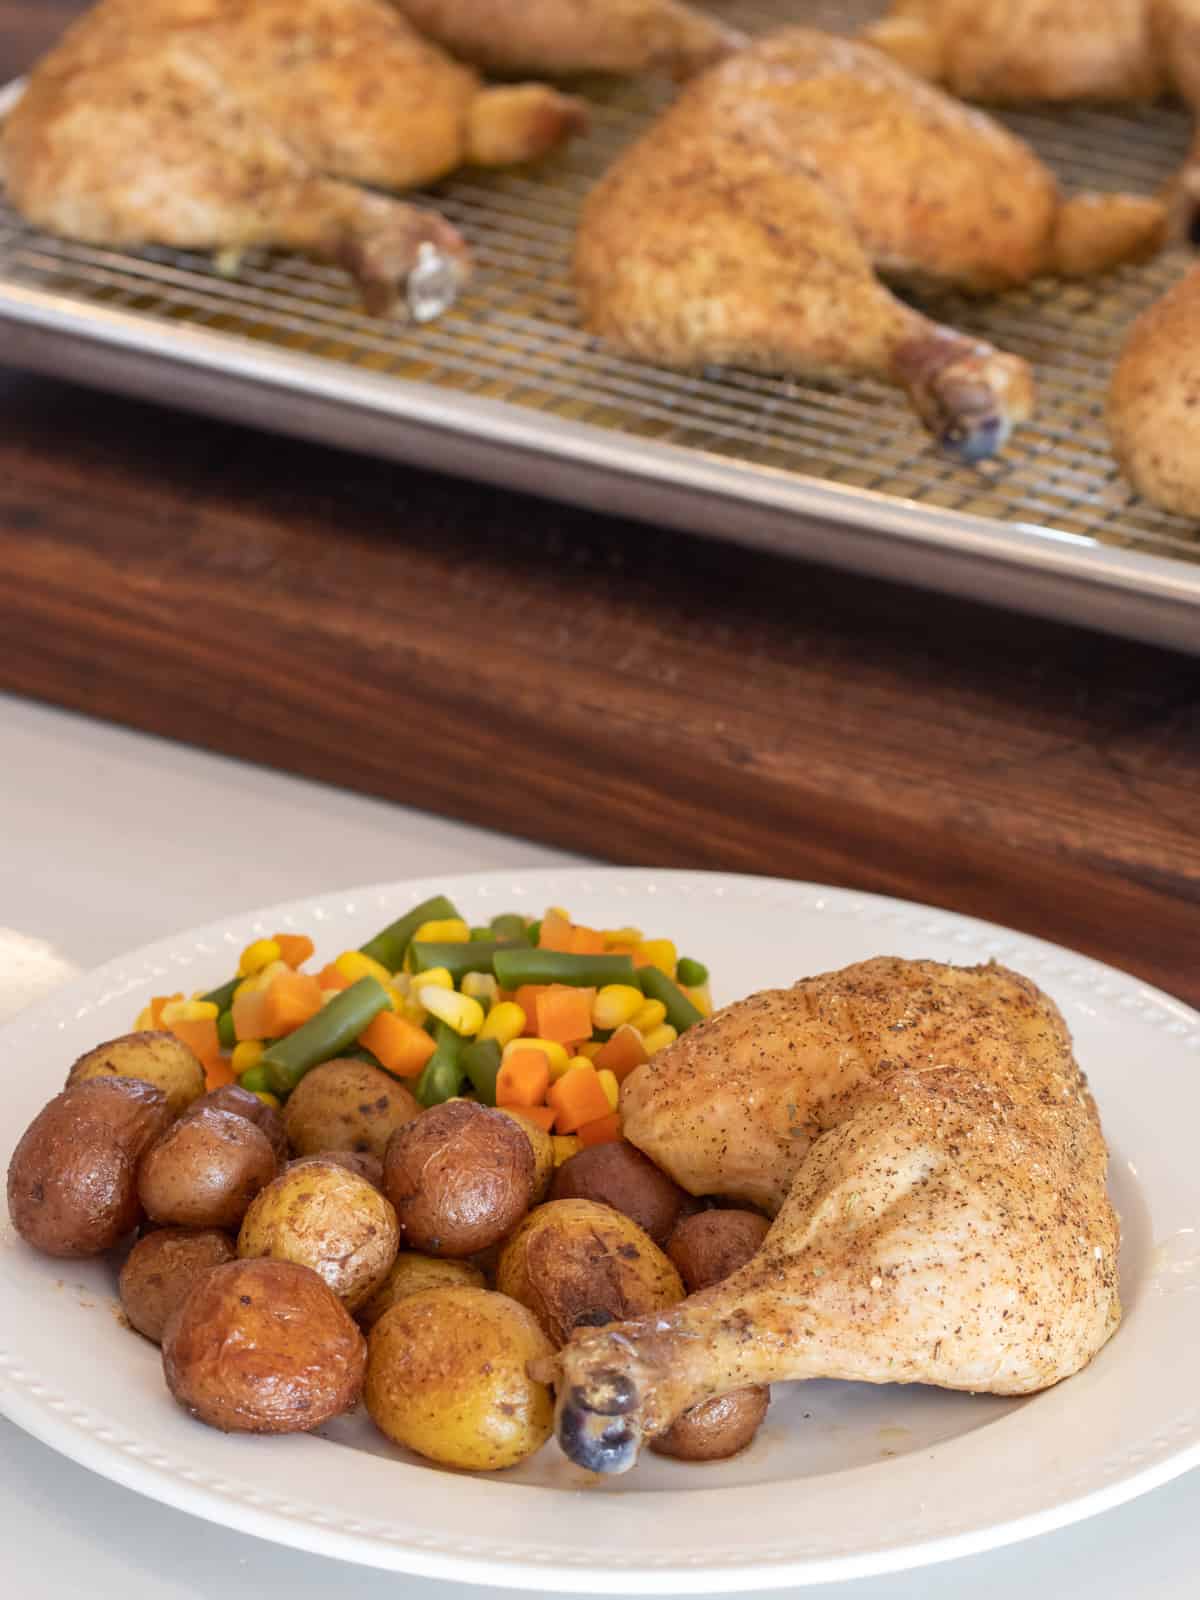 A dinner plate with baked chicken, potatoes and mixed vegetables.